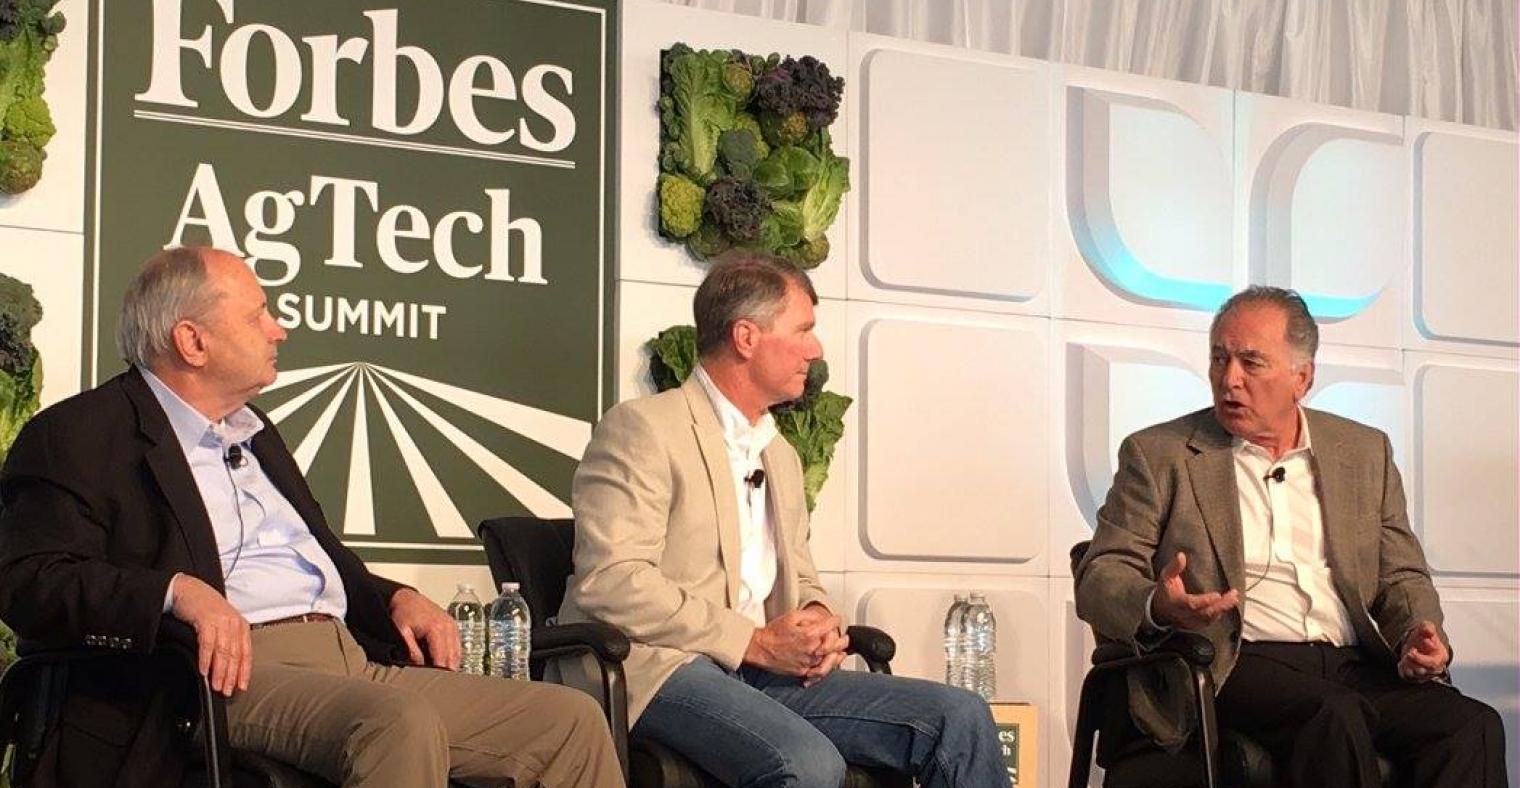 Western Growers Labor Panel at Forbes AgTech Summit